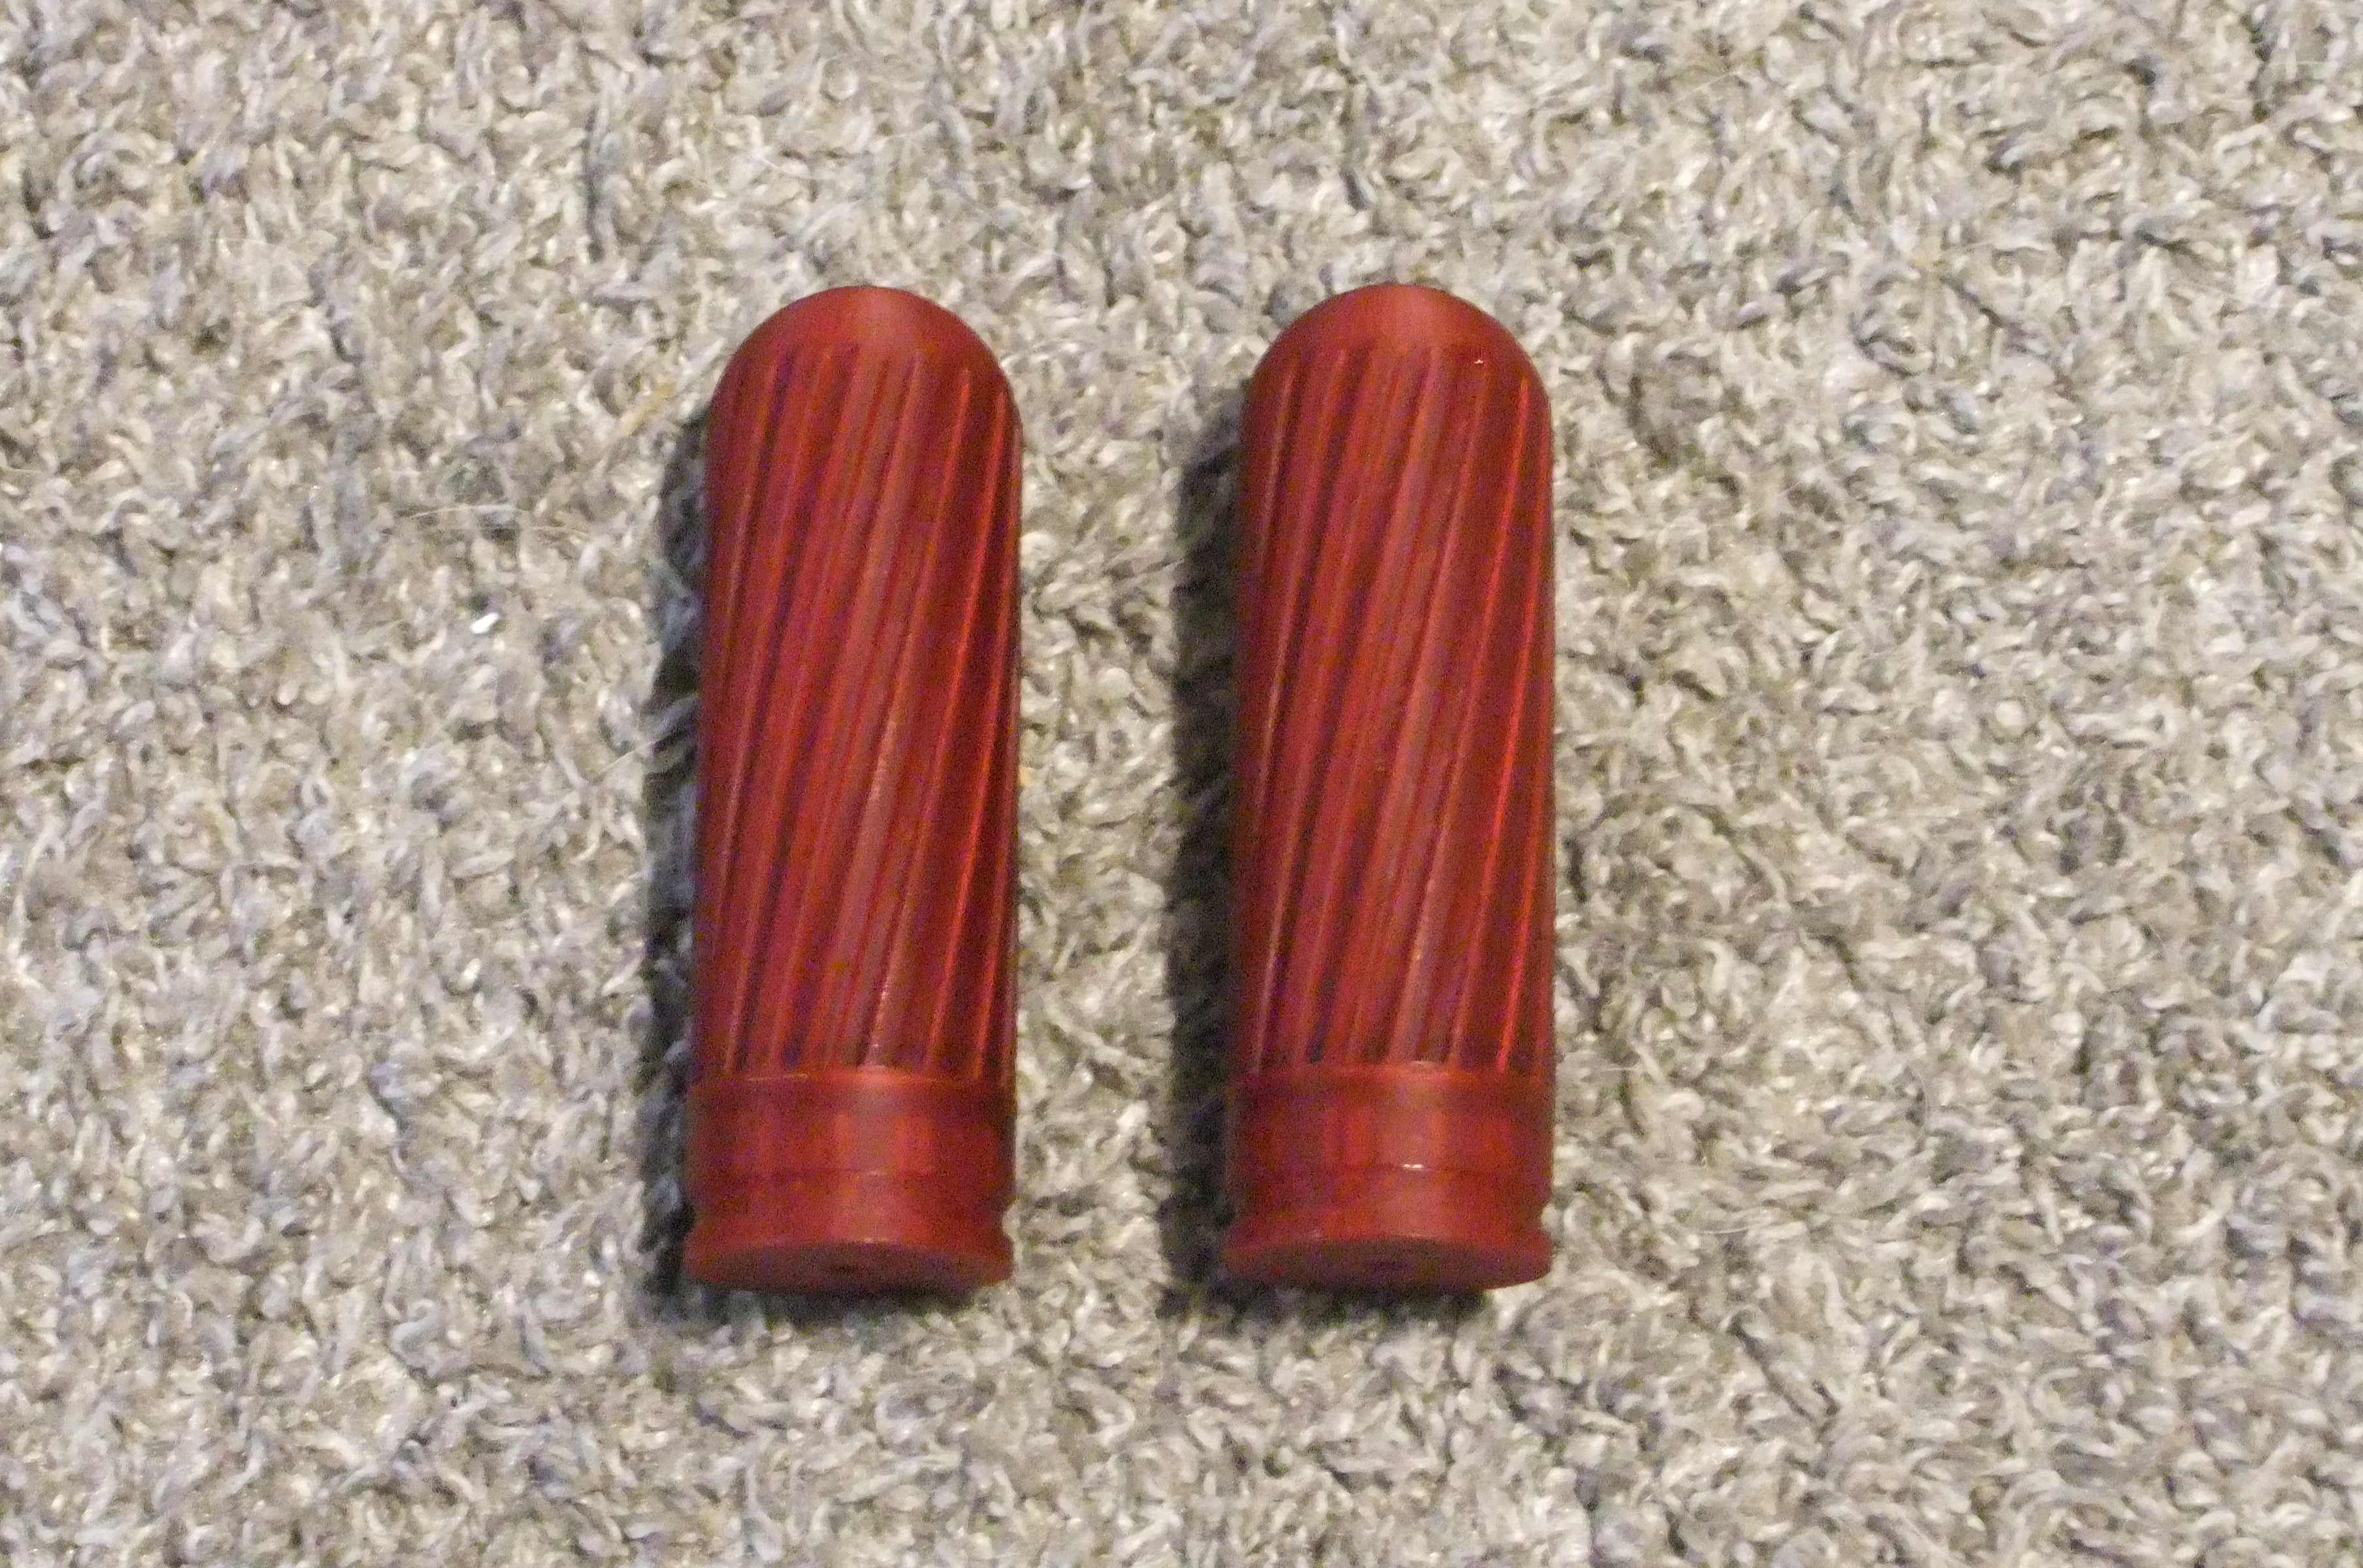 2 Pack of XL Limited Edition Translucent Blood Red Rifled High Pressure Projos!!